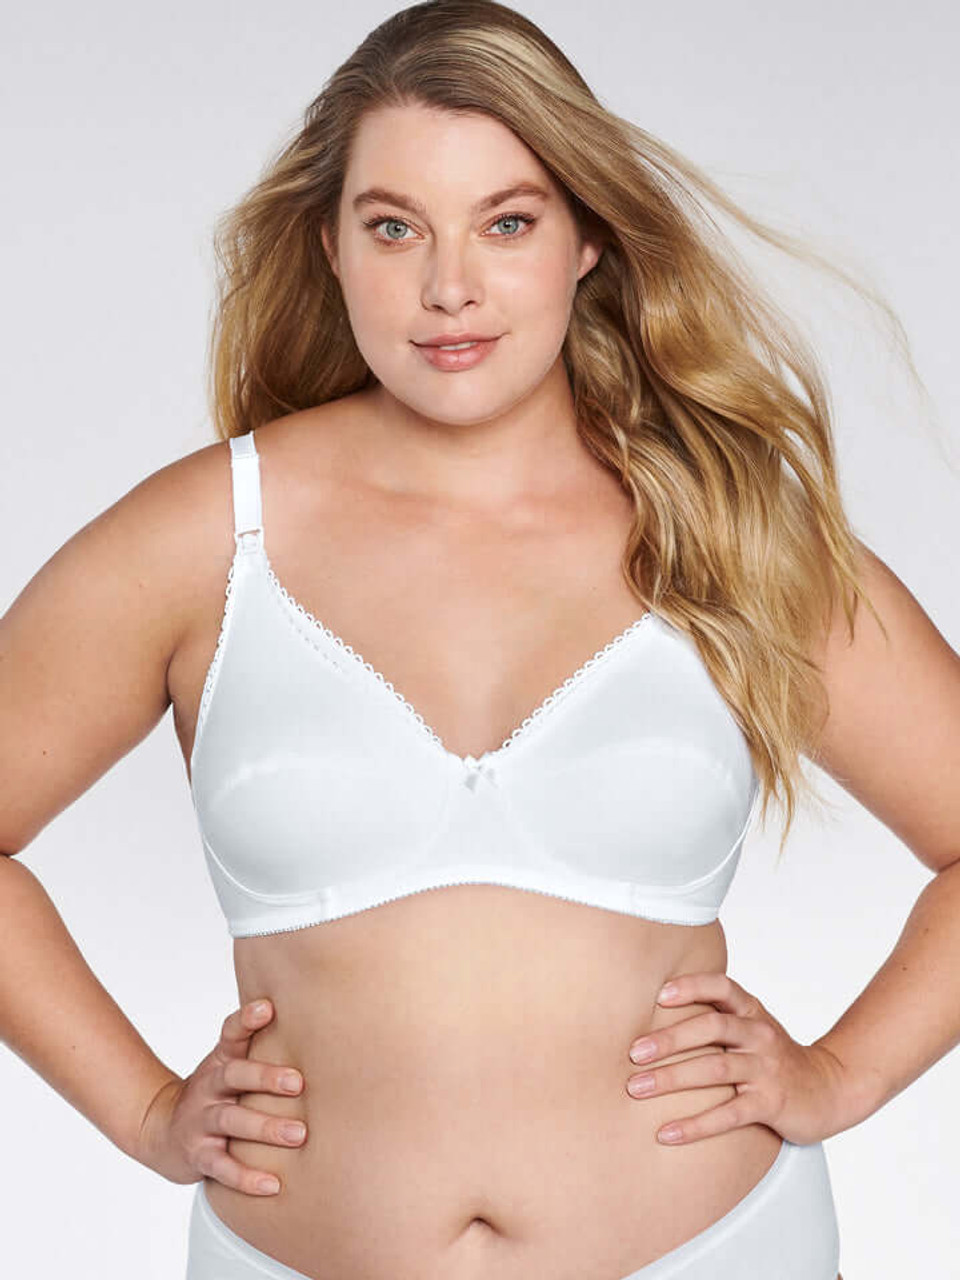 No matter if your size is 42B, 50E or 38I, our JANA Cotton Support Bra is  made for all body types and sizes! #JANA #Cotton #WirelessBra